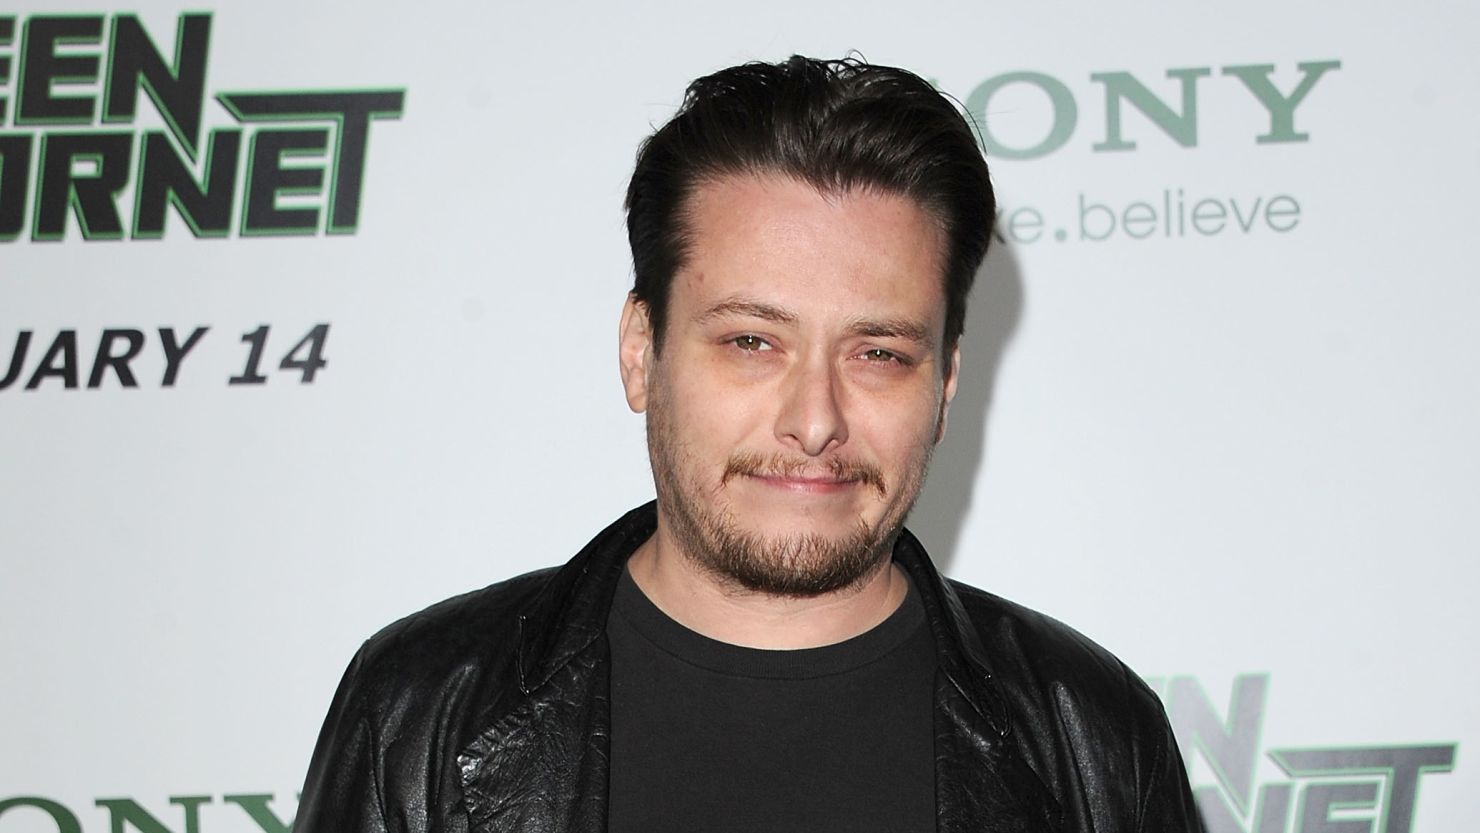 Edward Furlong is best known for his role in "Terminator 2: Judgment Day."